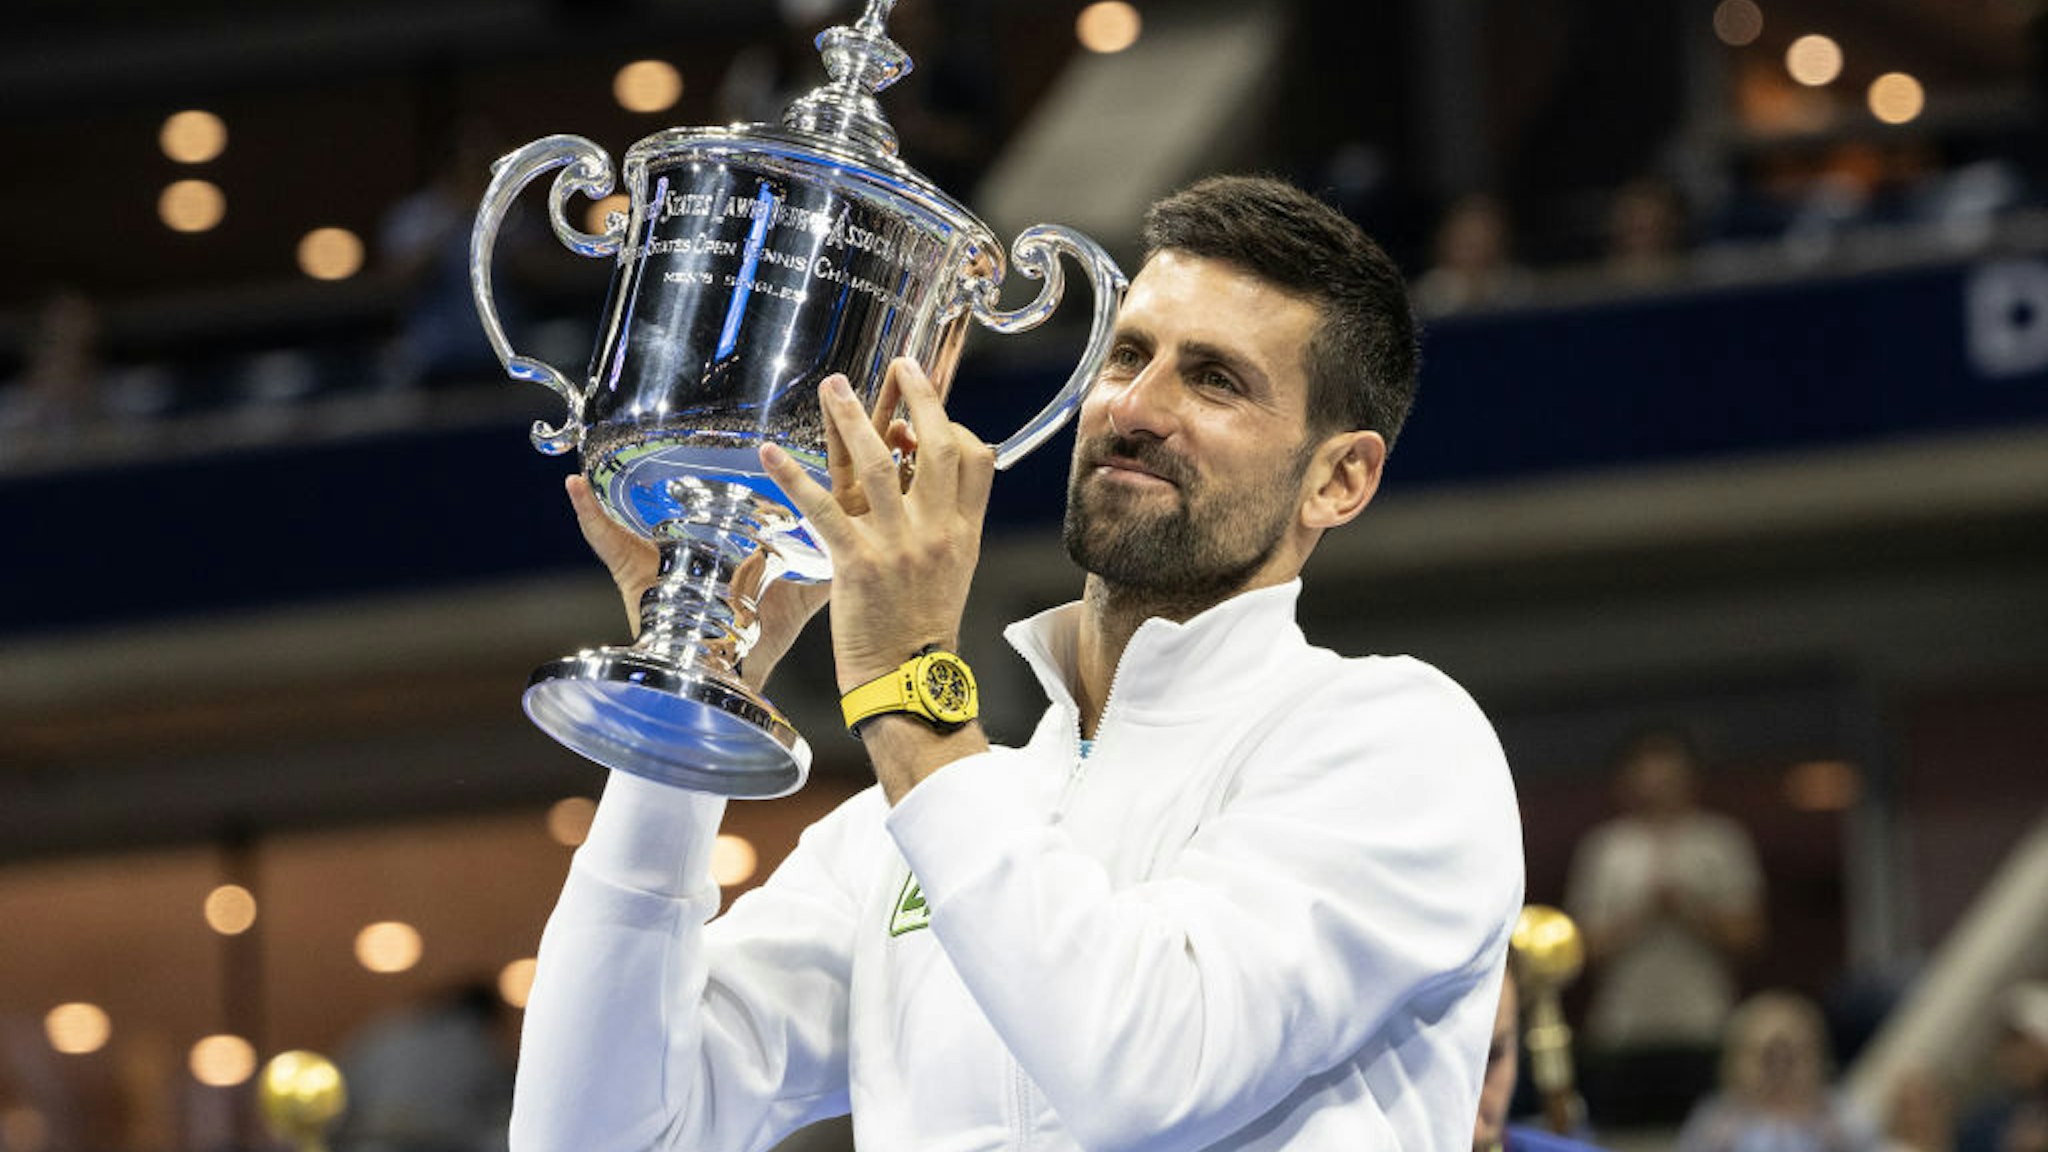 Novak Djokovic of Serbia poses with the championship trophy after winning the final against Daniil Medvedev of US Open Championships at Billie Jean King Tennis Center in New York on September 10, 2023.